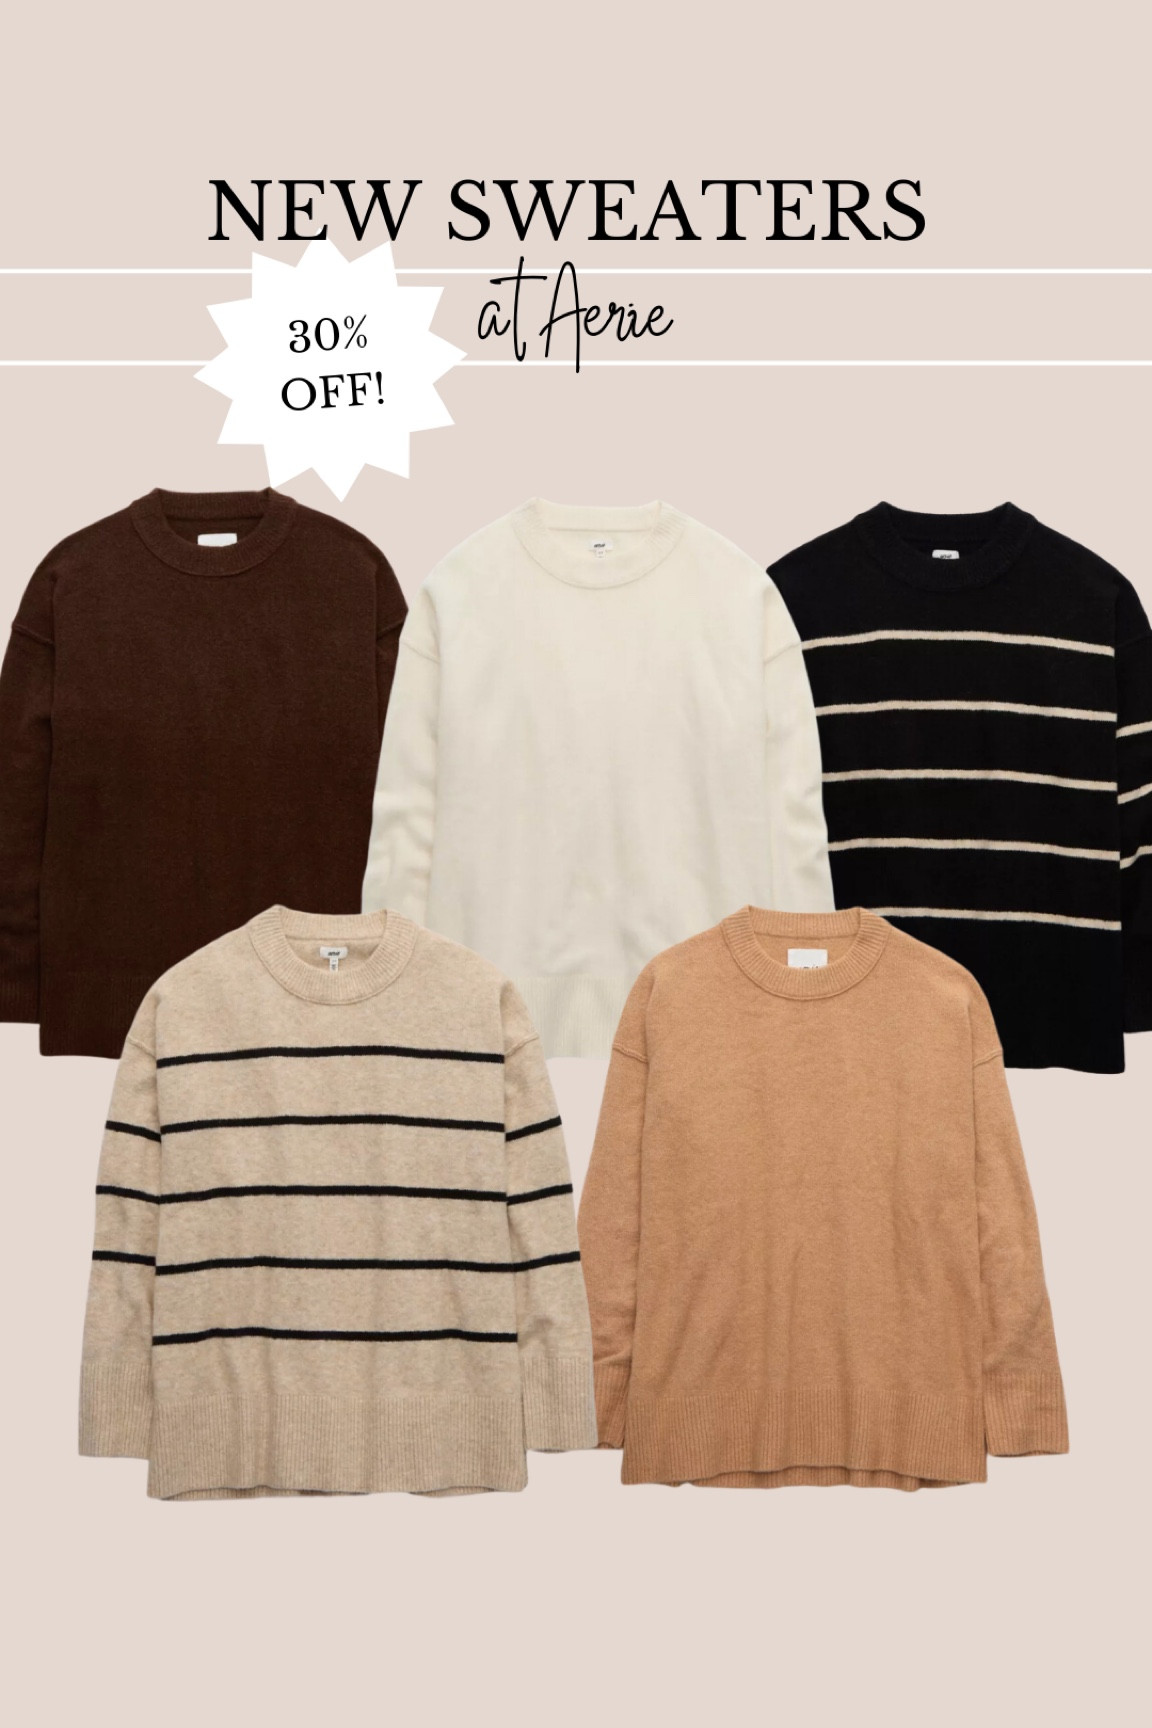 aerie, Sweaters